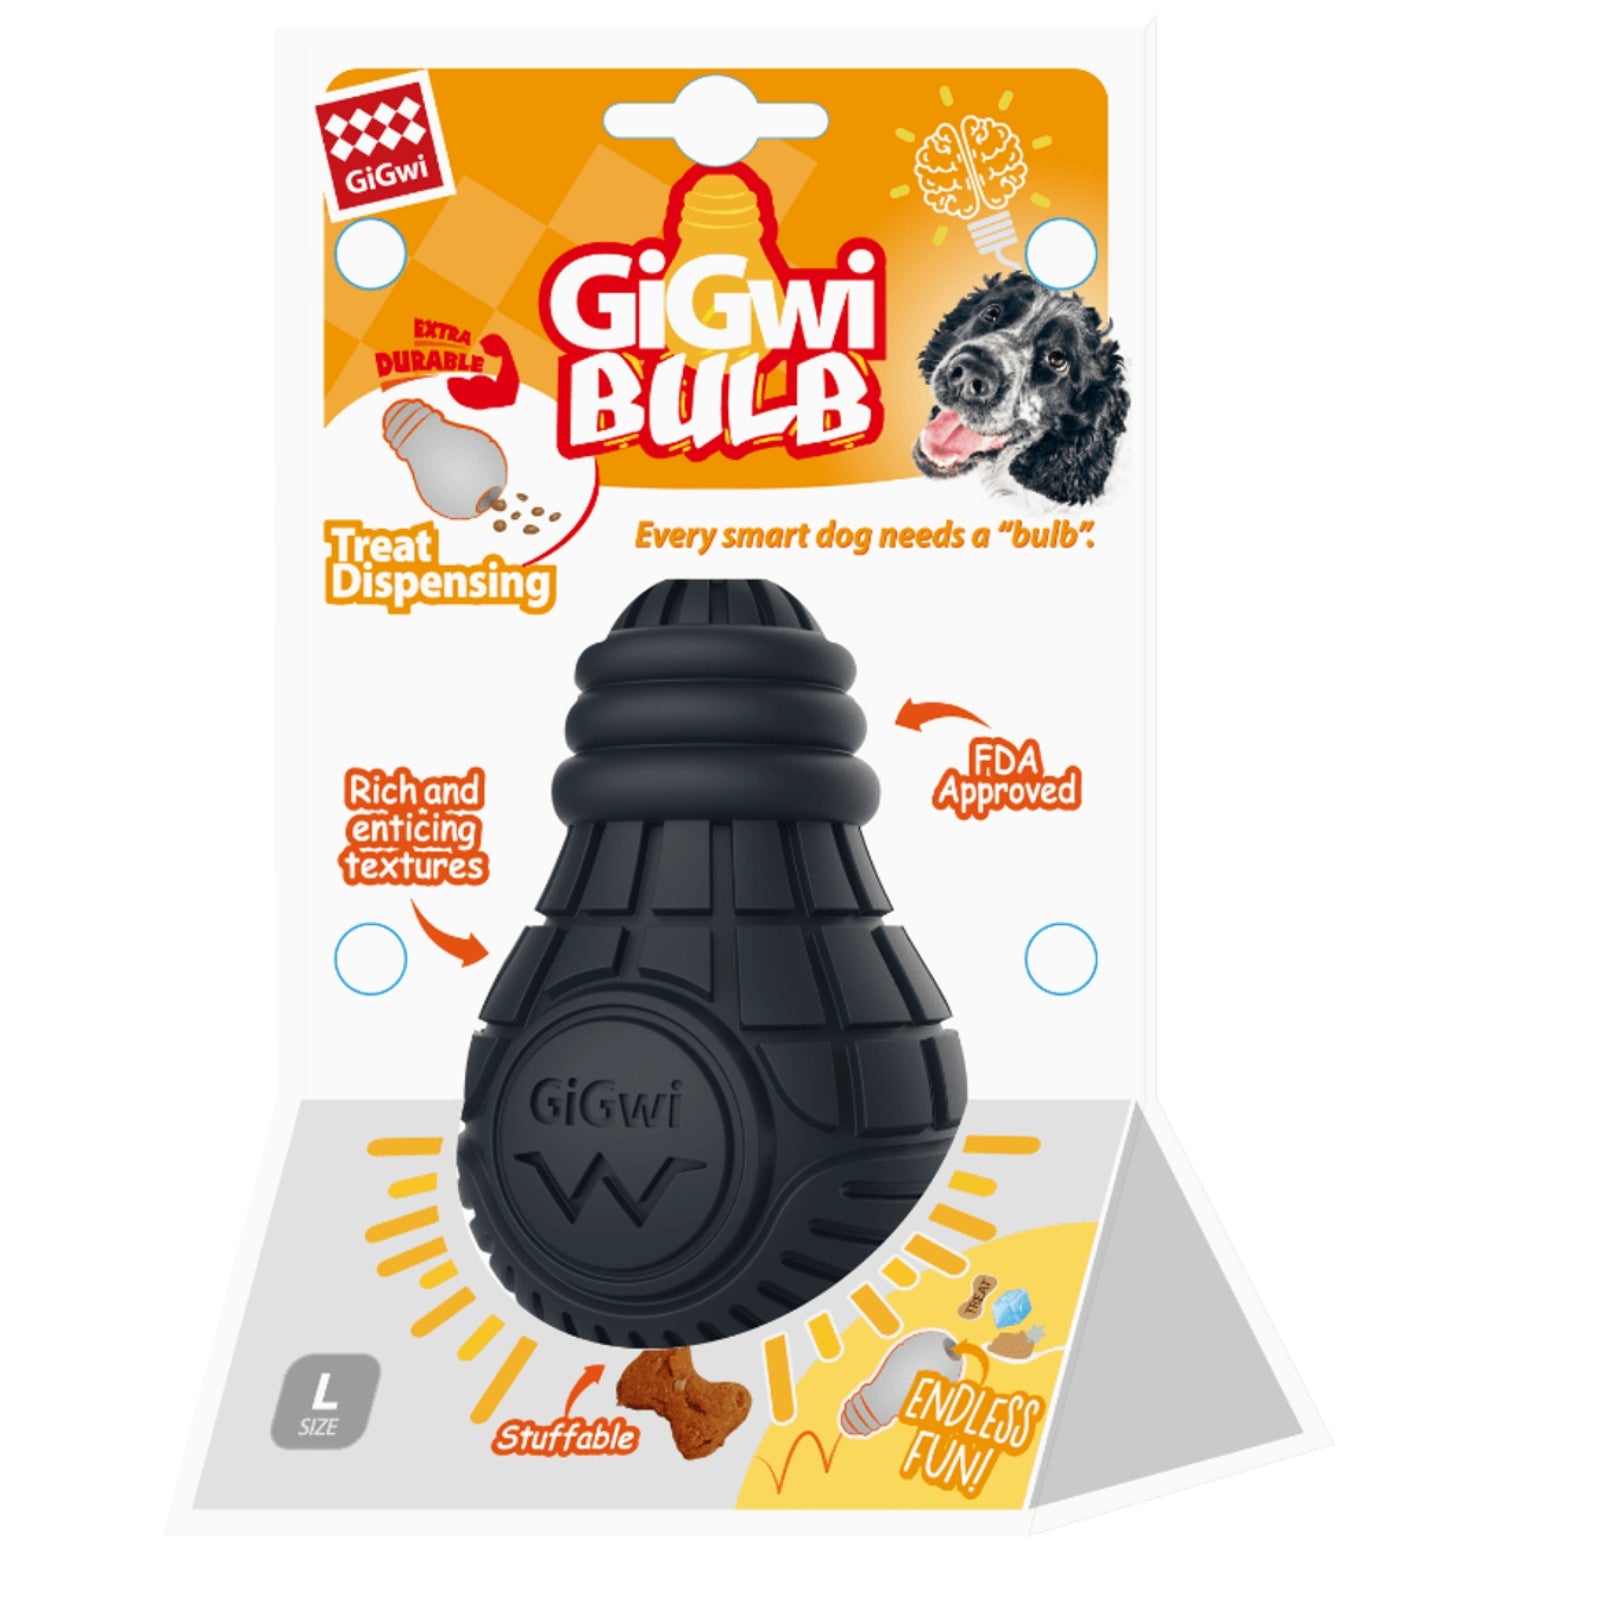 GIGWI Bulb Treat Dispensing Interactive Dog Toy for Large Sized Dogs